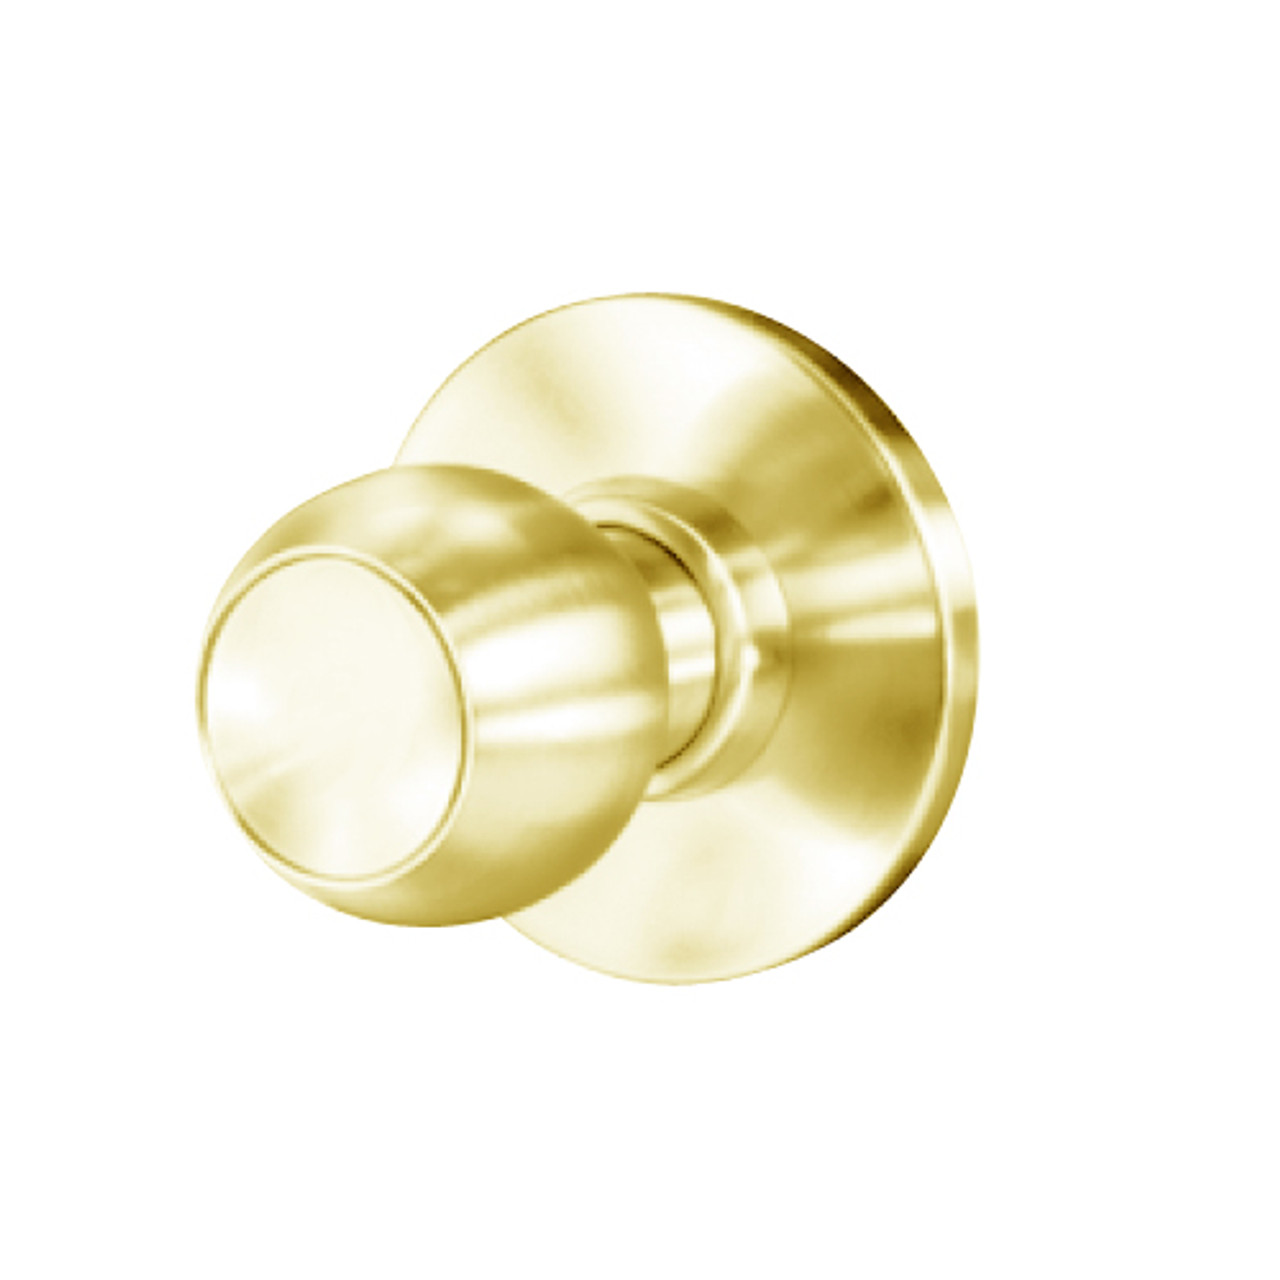 8K30Q4AS3605 Best 8K Series Exit Heavy Duty Cylindrical Knob Locks with Round Style in Bright Brass